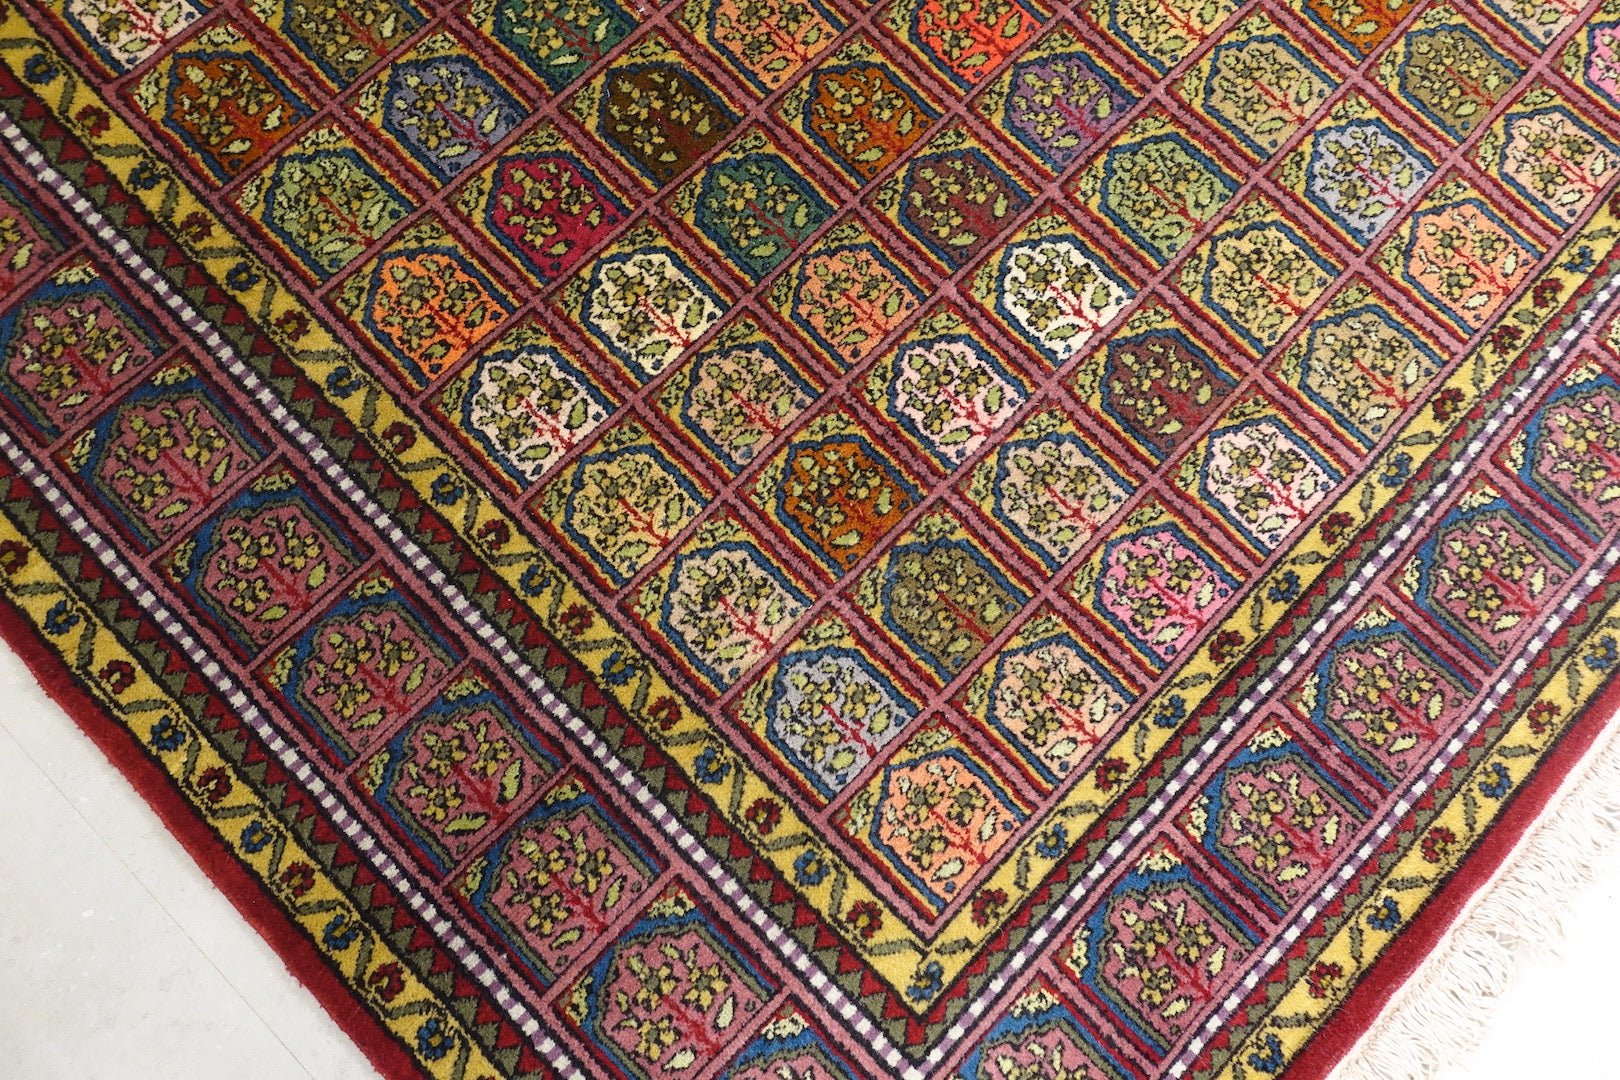 A 6 feet by 9 feet Kashmiri woolen rug, the colours used on the rug are red,orange,green, beige and blue.